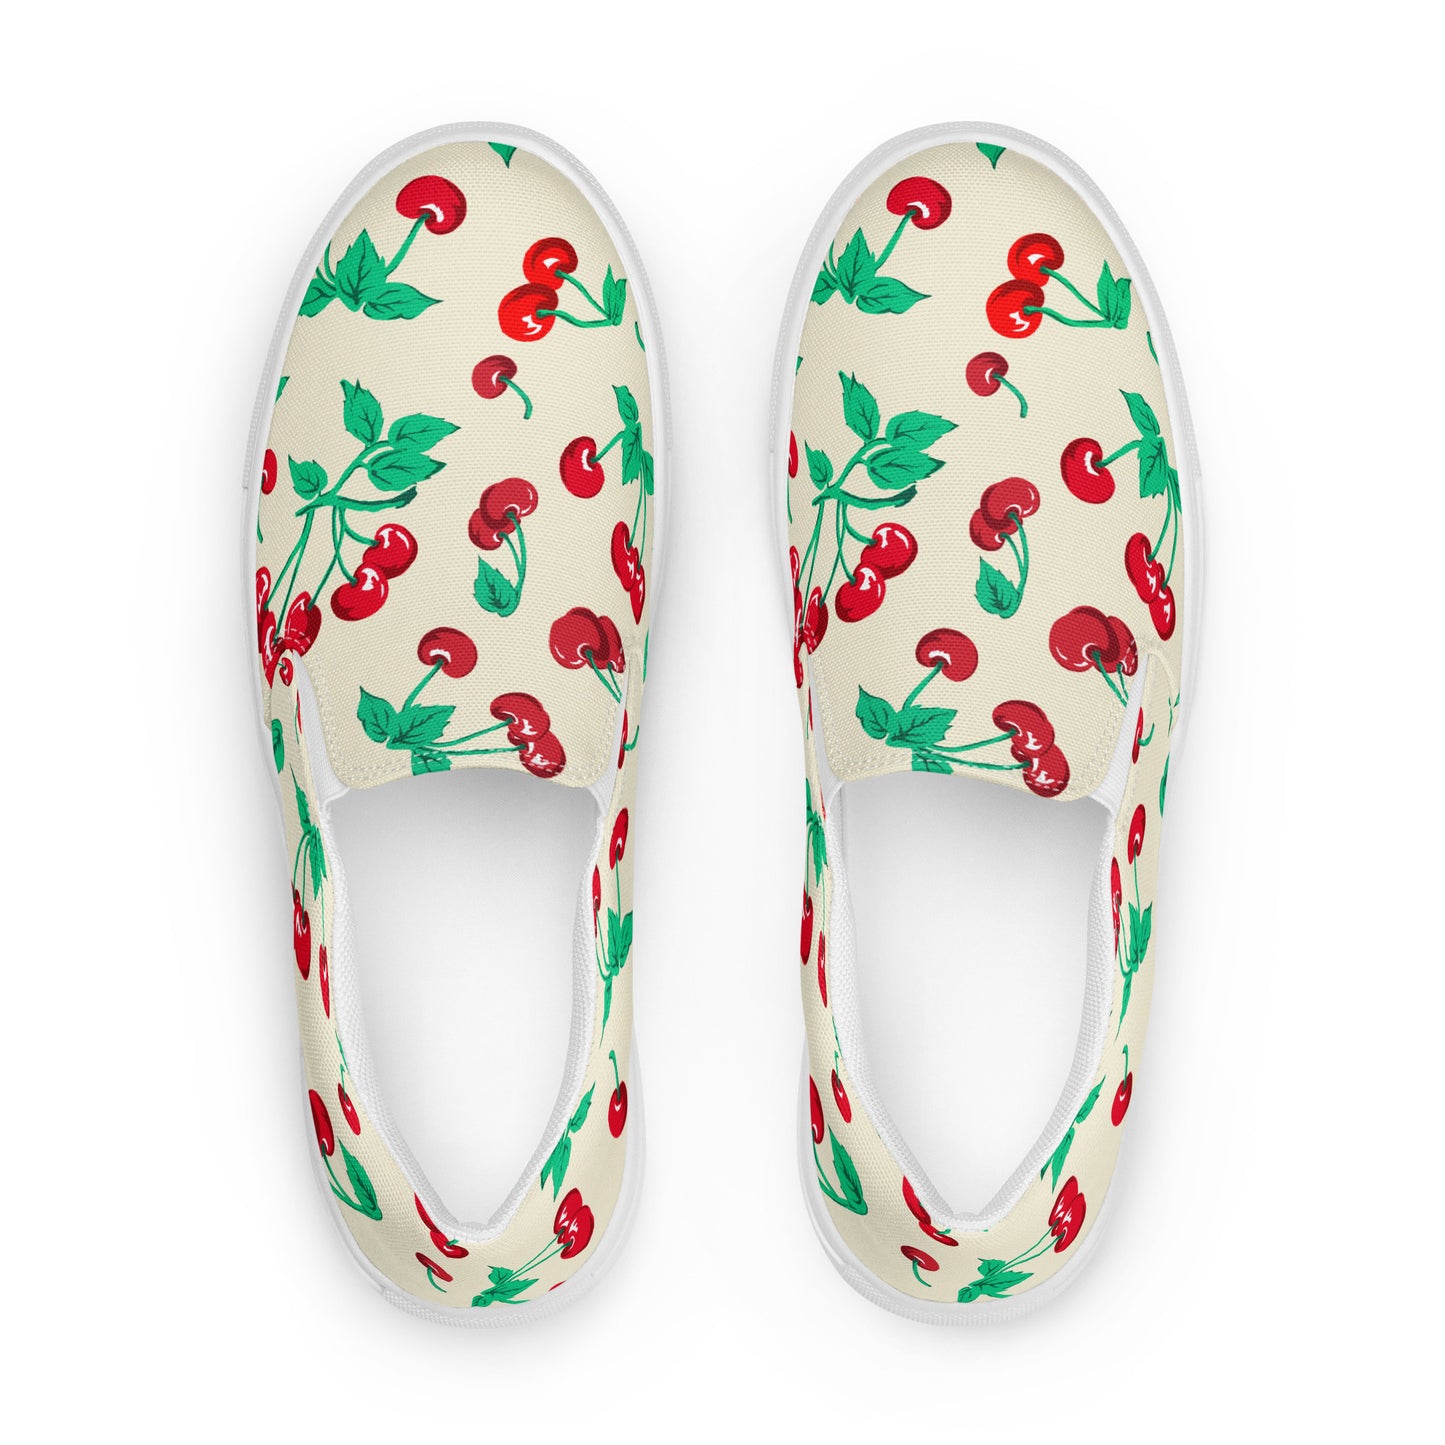 Antique Ivory Cherry Girl Women's Canvas Slip-On Flat Deck Shoes | Pinup Couture Relaxed